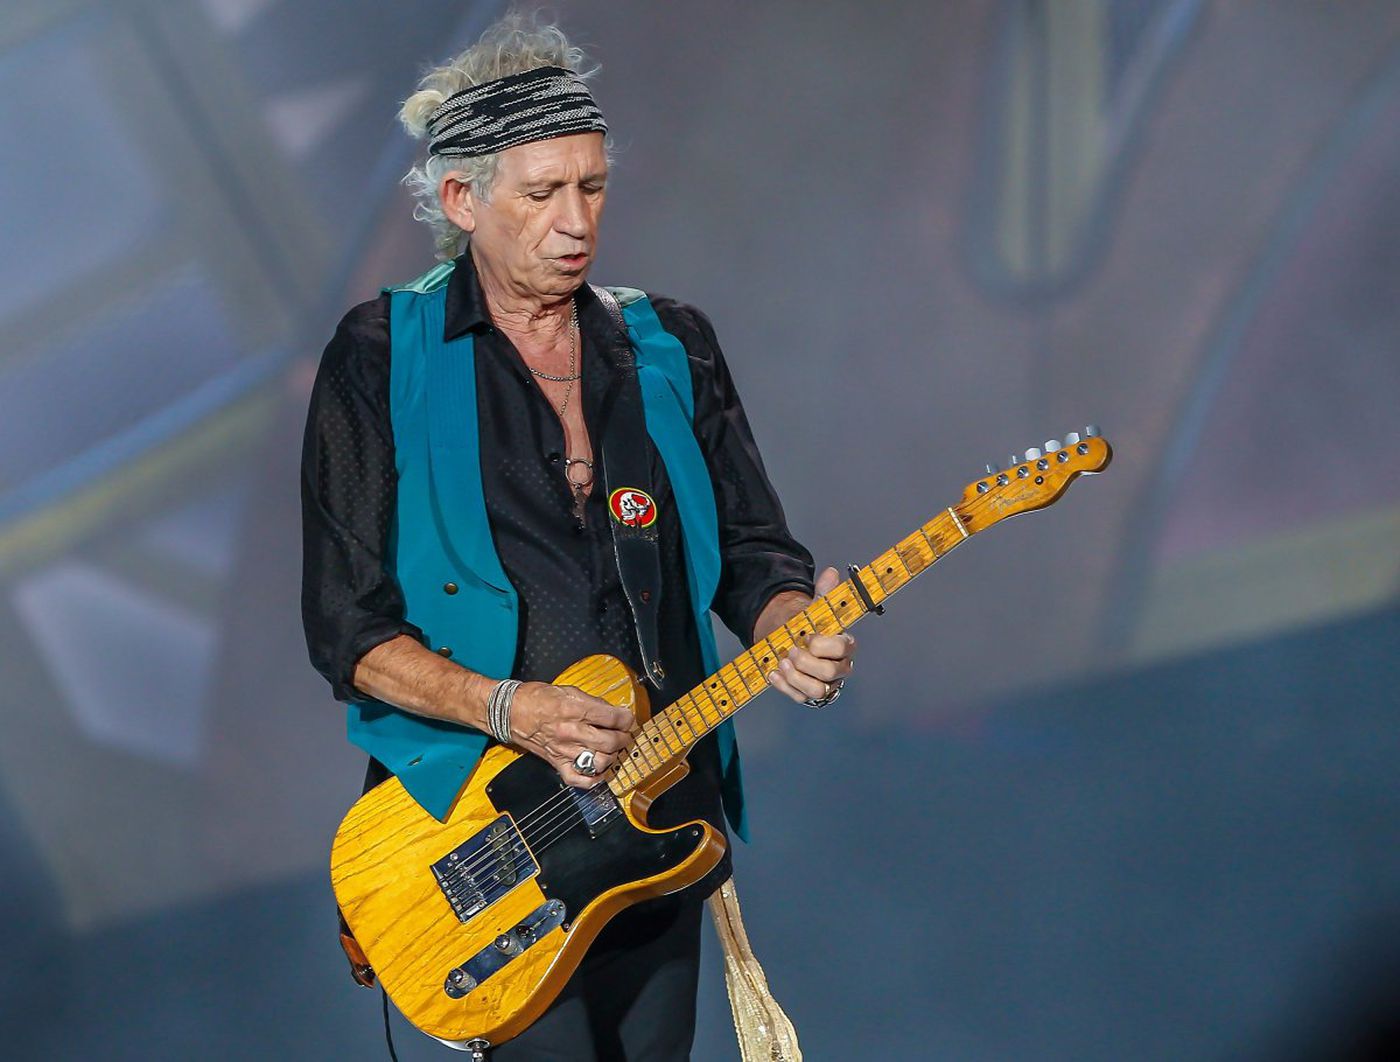 How rich is Keith Richards?